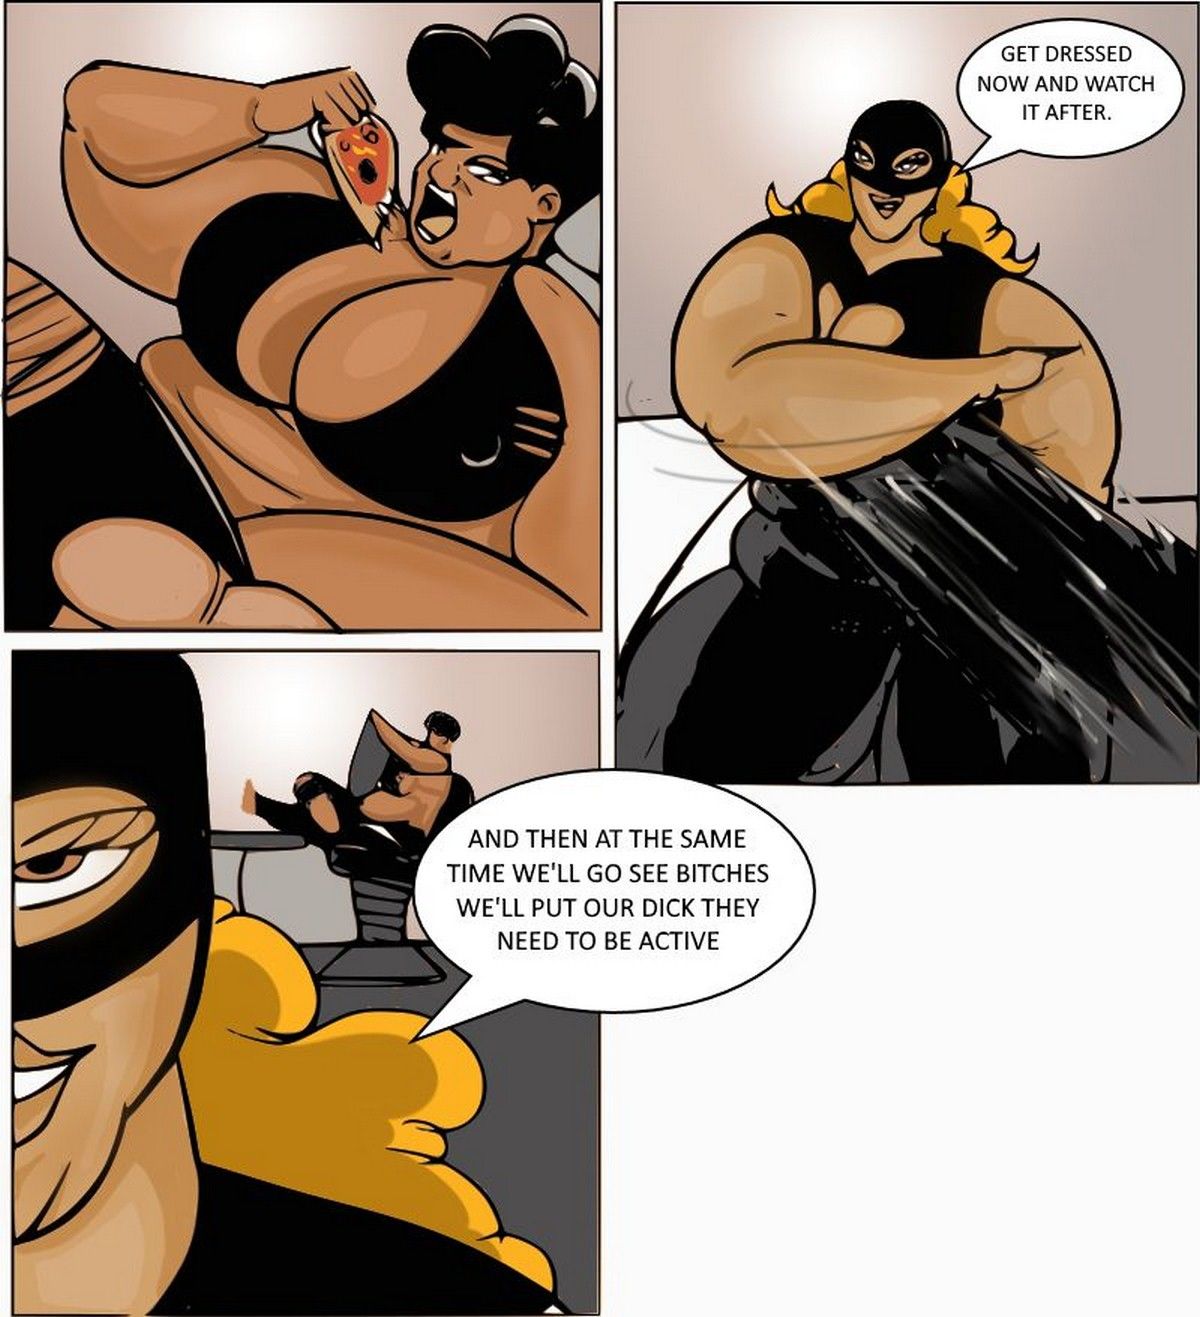 BAD T.S ORGY - BWW page 3